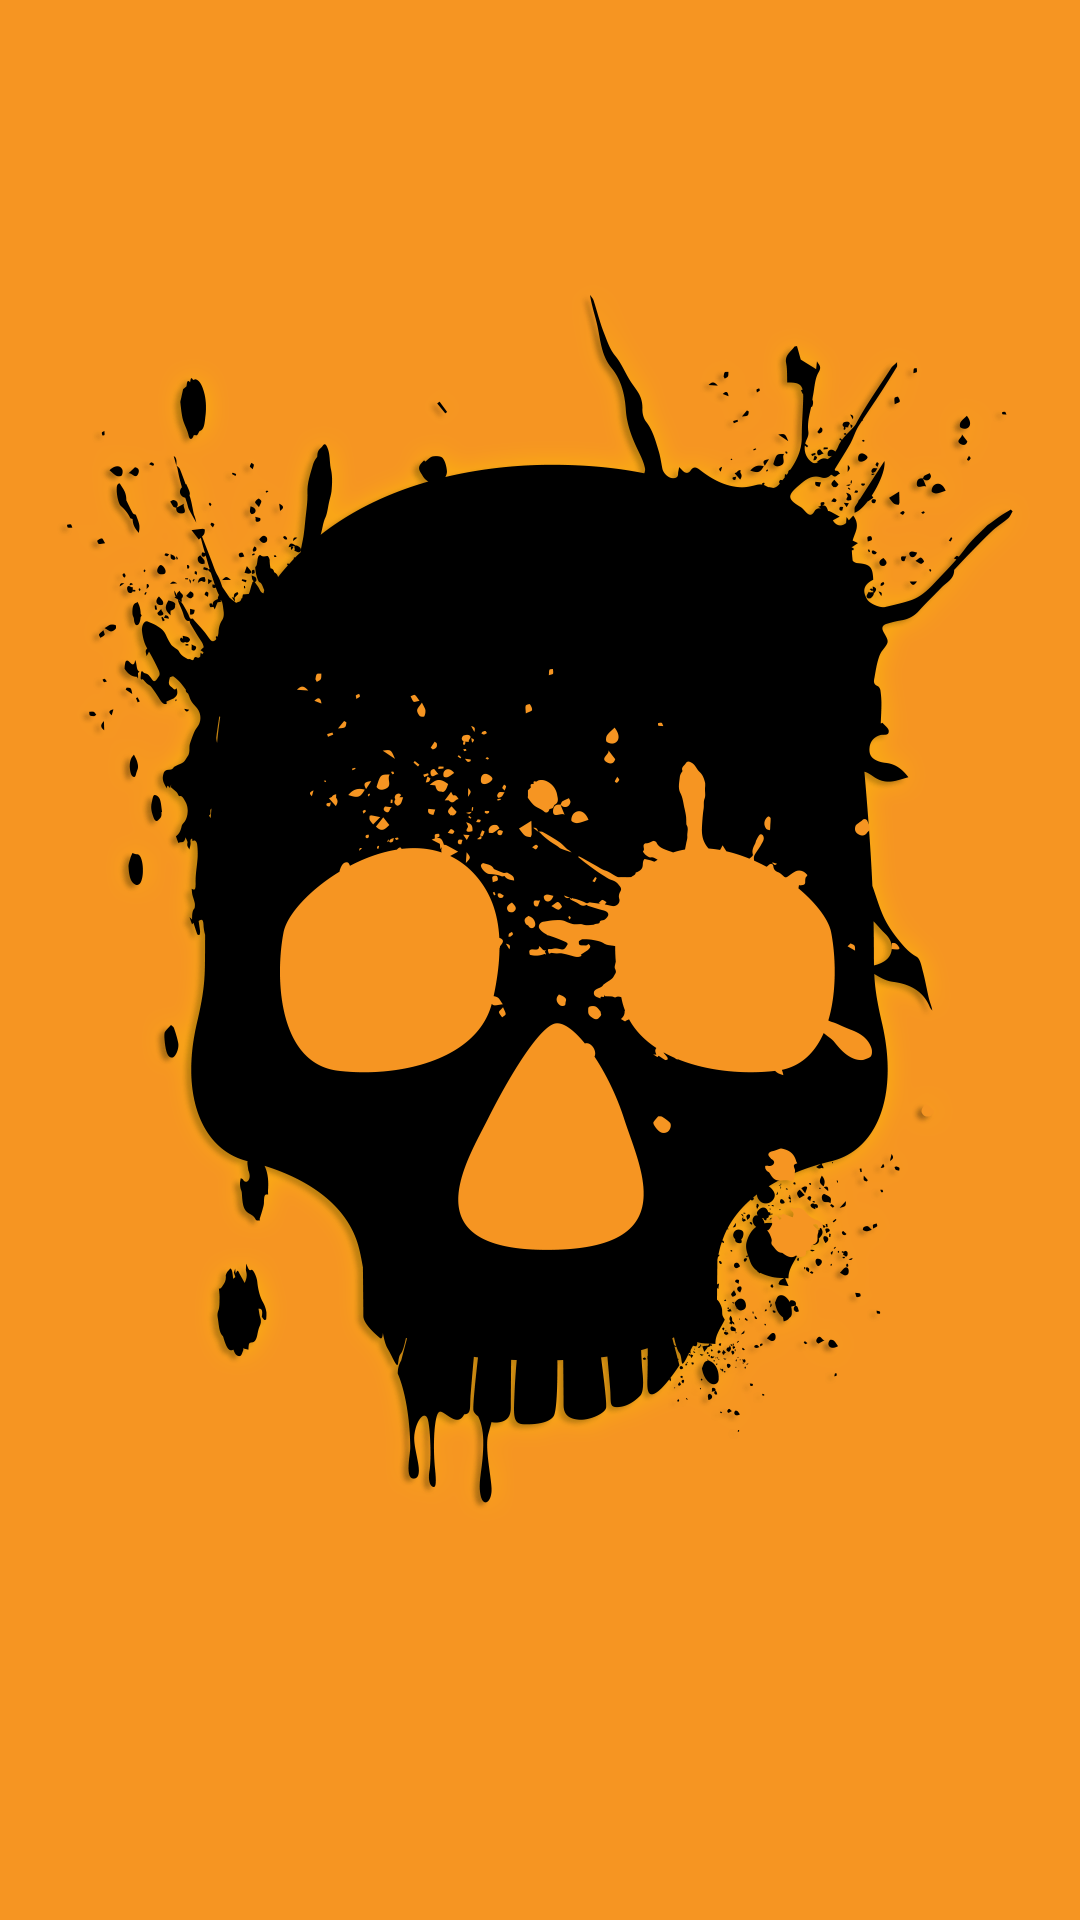 Download Our HD Wasted Skull Wallpaper For Android Phones .0275